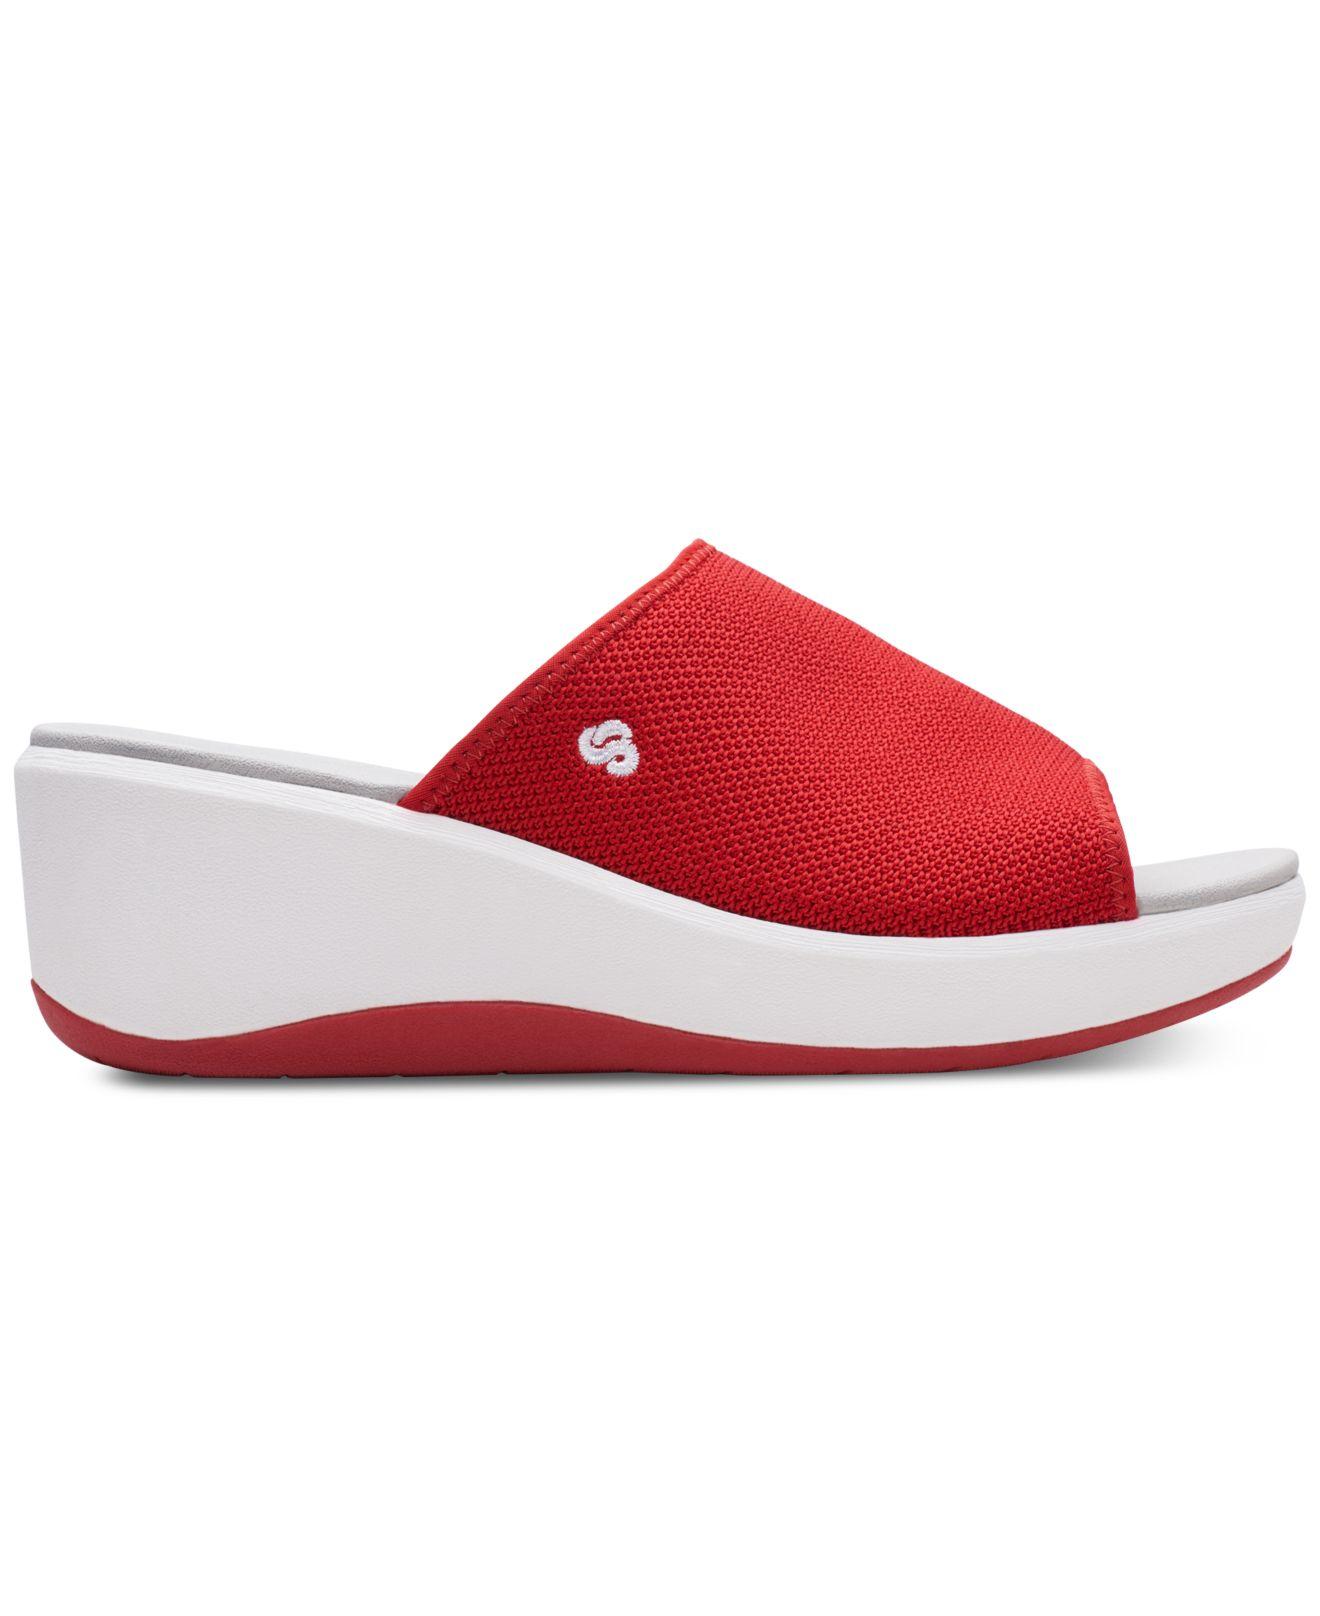 Clarks Cloudsteppers Step Cali Bay Slide Sandals in Red | Lyst